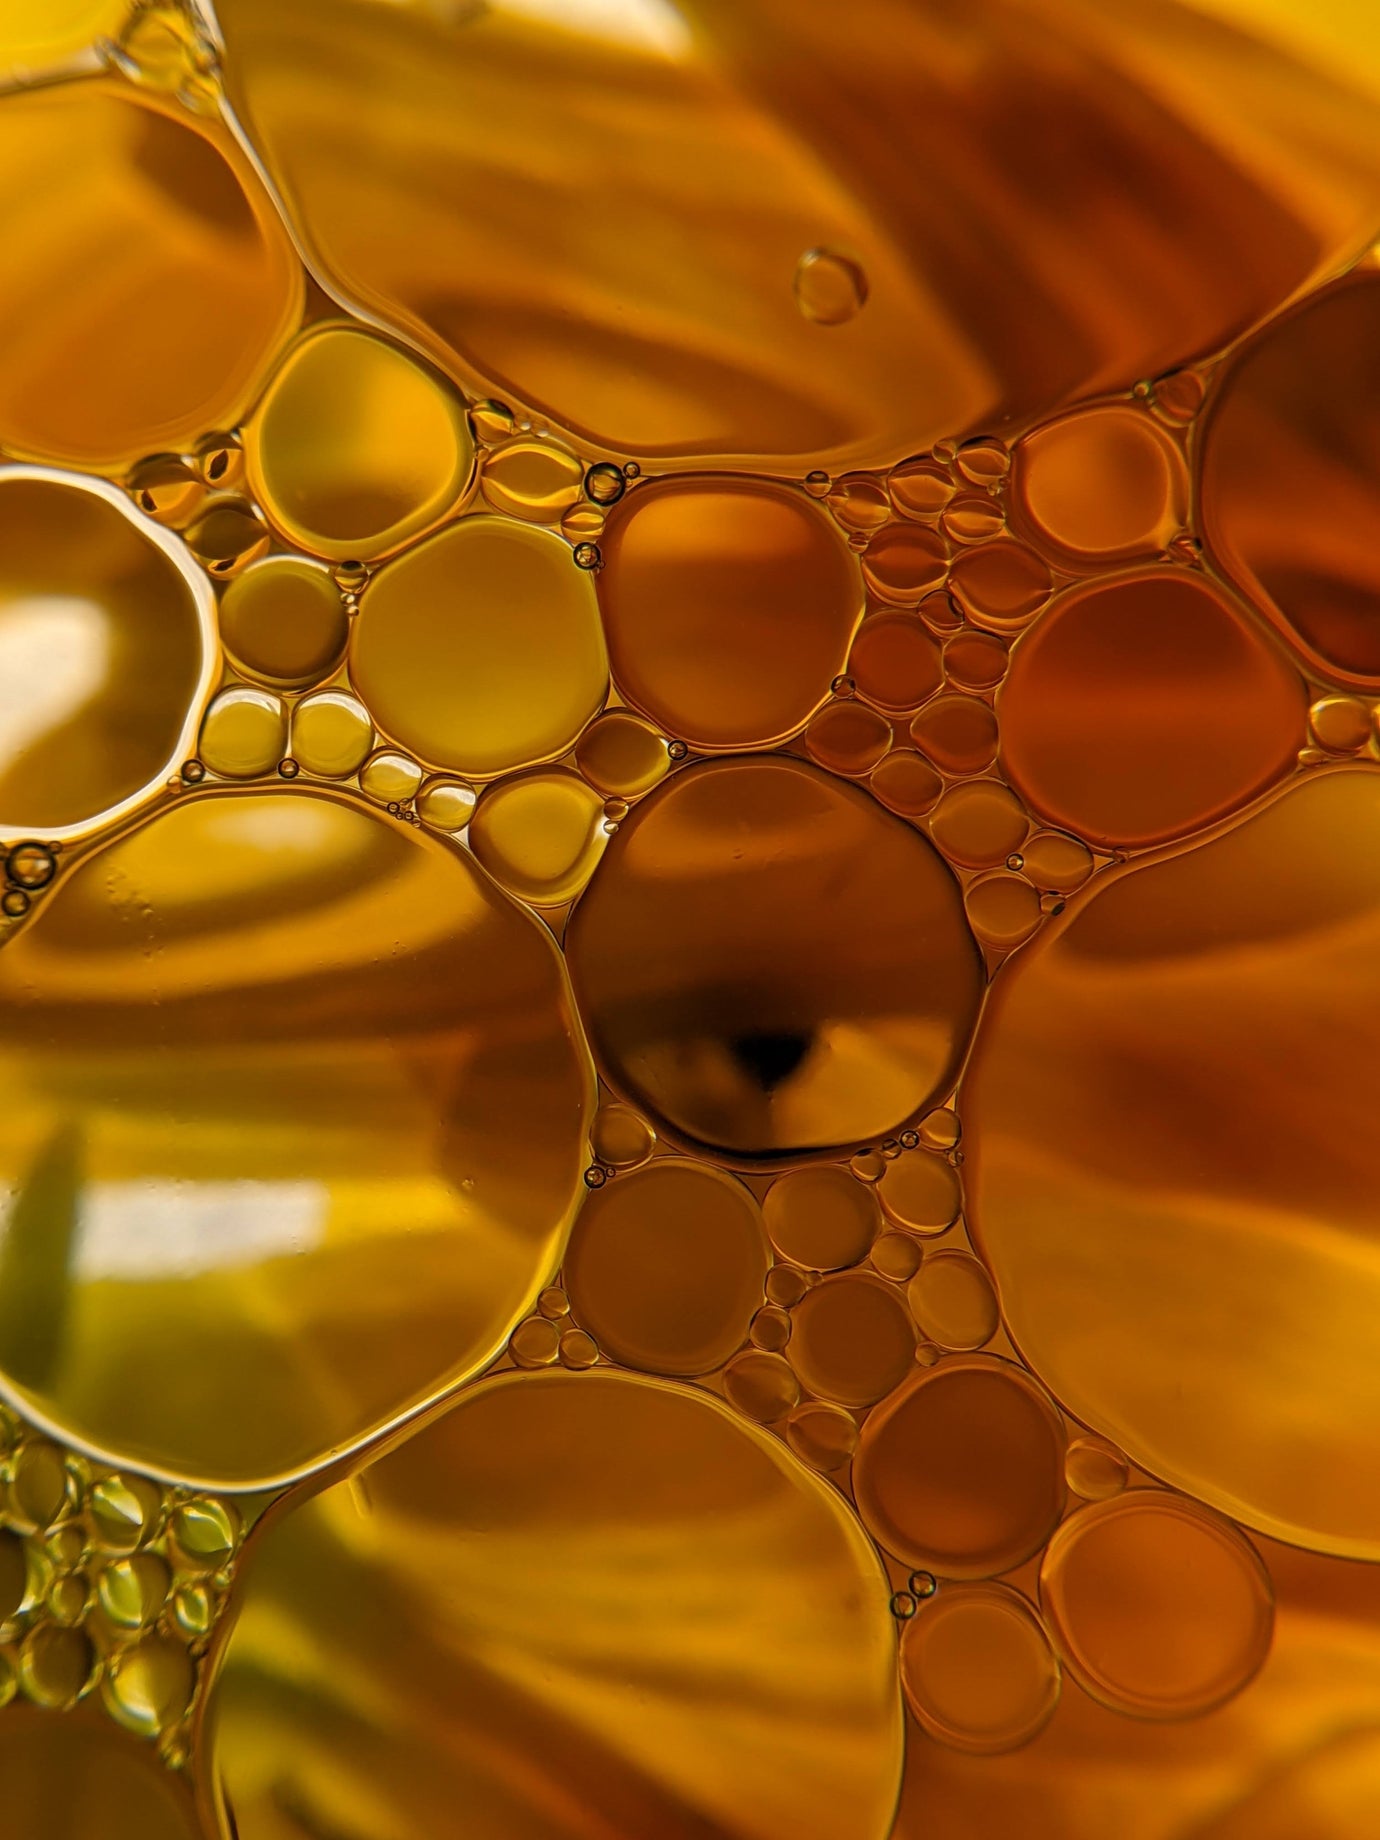 What Is Expeller Pressed Canola Oil?